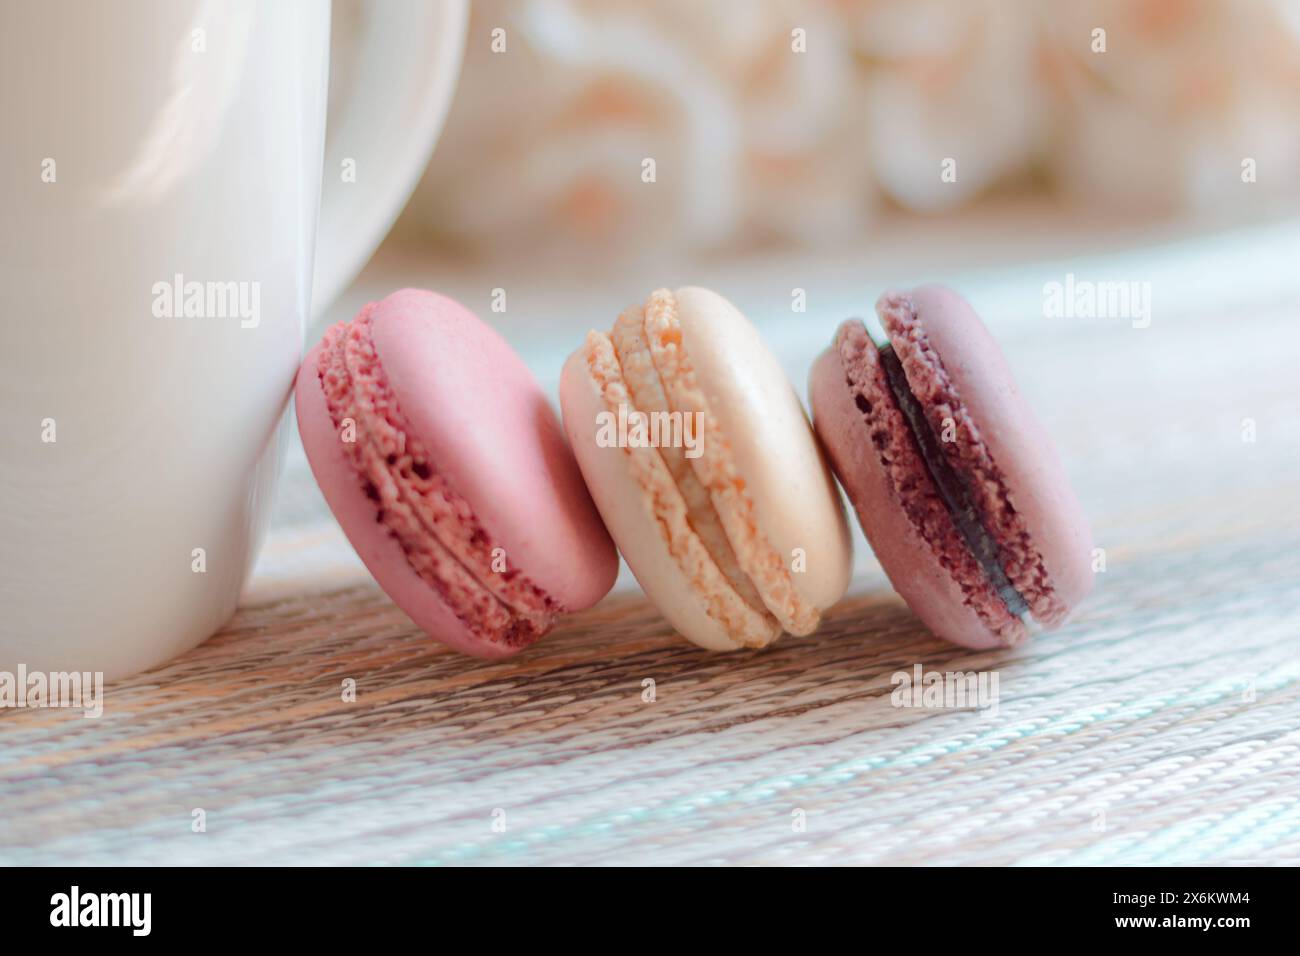 Homemade macaroon of different flavors, with a nice and colorful background, gourmet presentation. Stock Photo